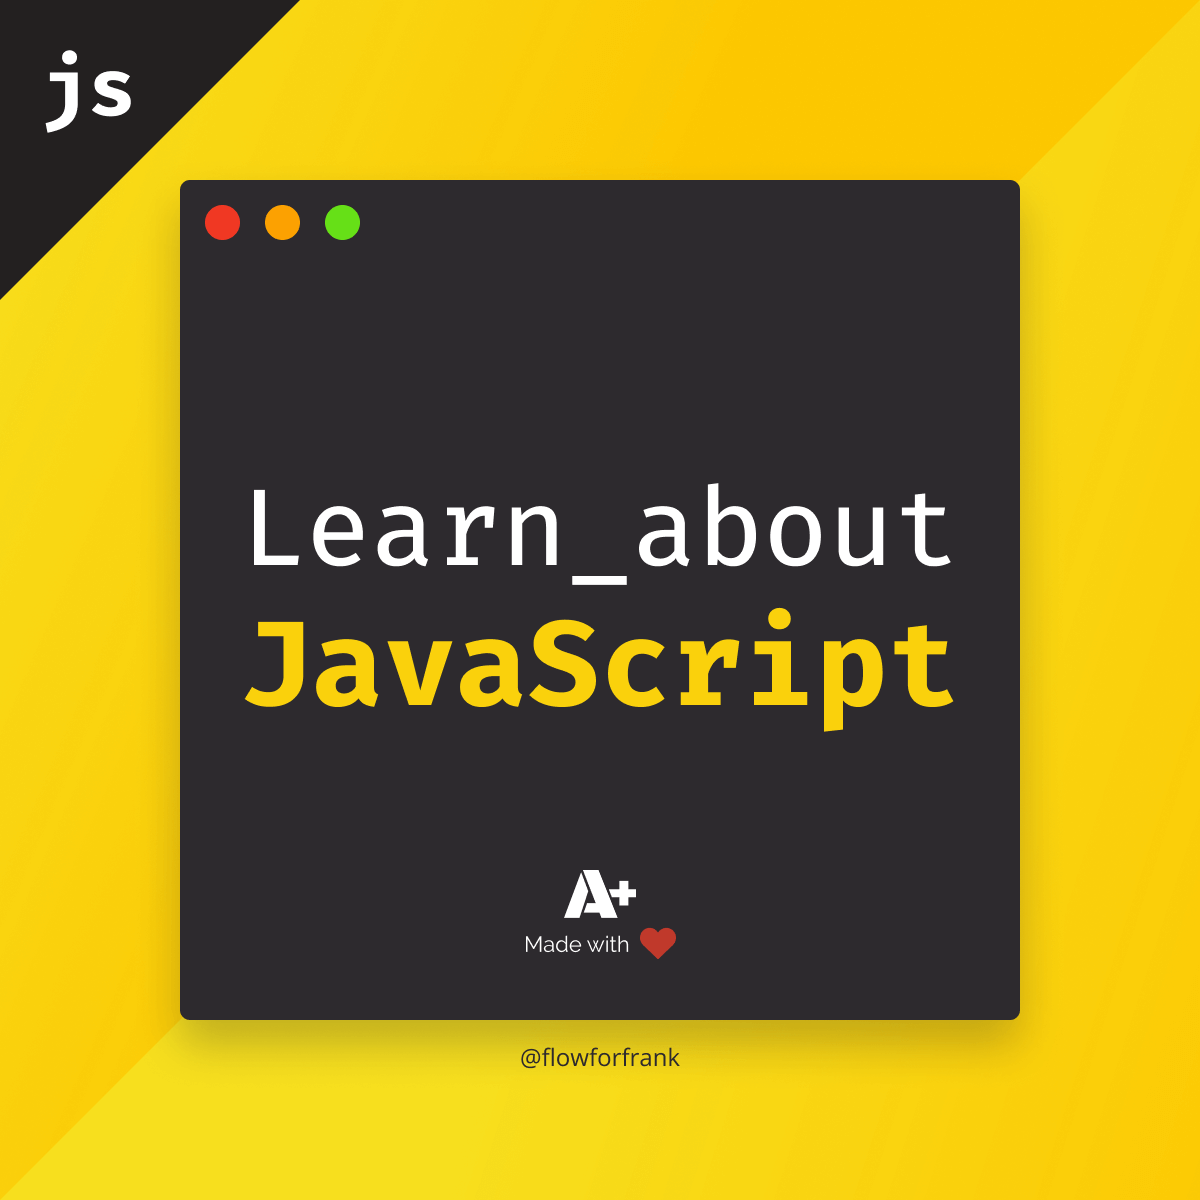 Learn about JavaScript